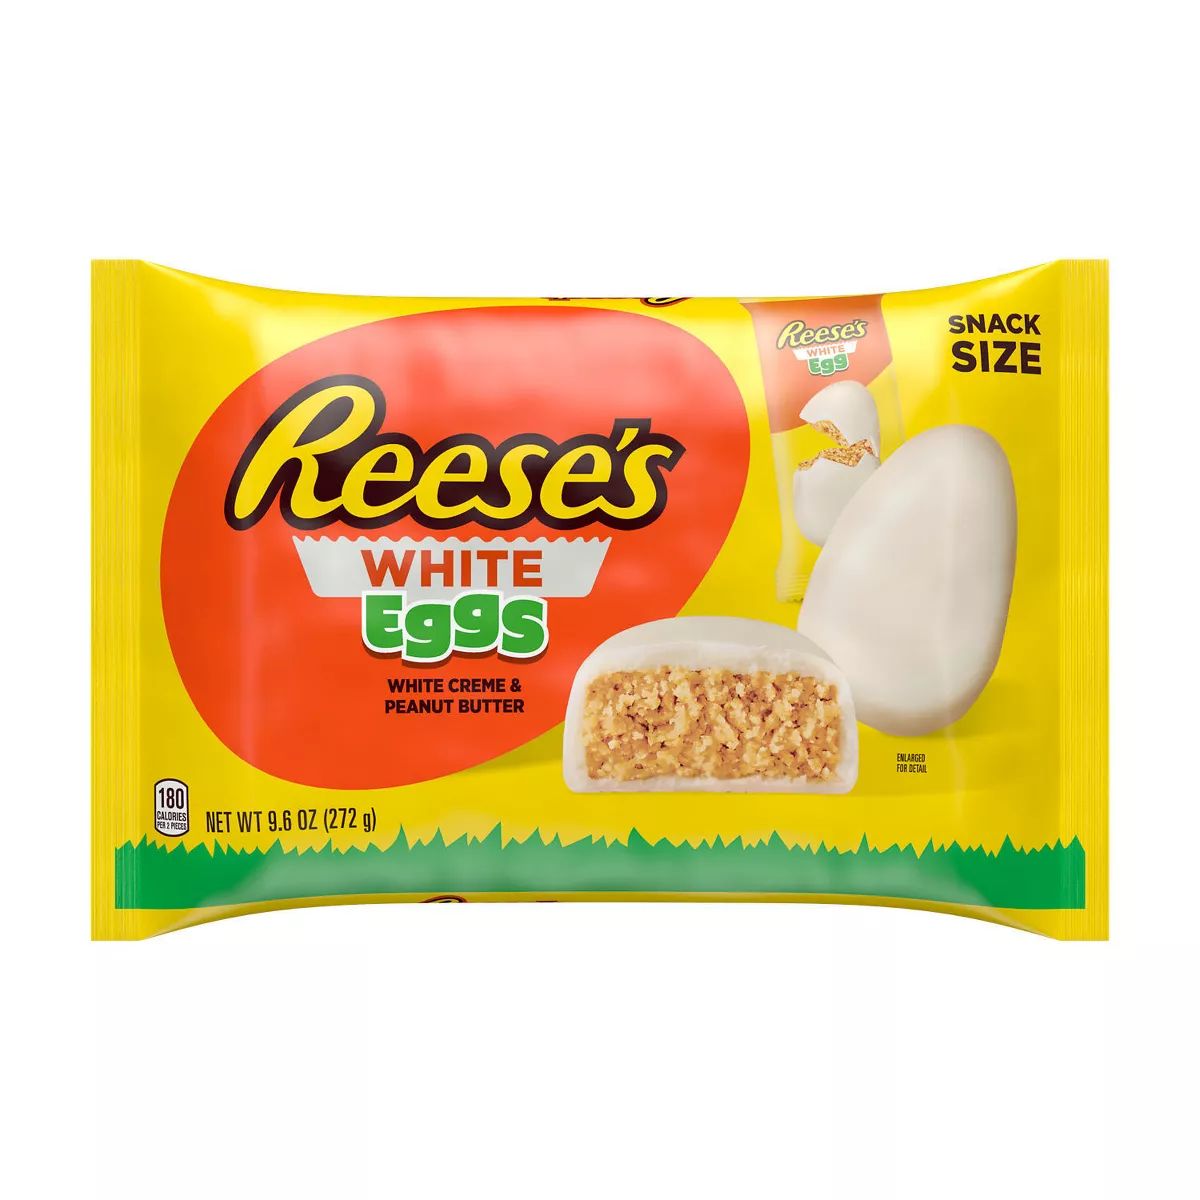 Reese's White Crème Peanut Butter Eggs Easter Candy Snack Size - 9.6oz | Target